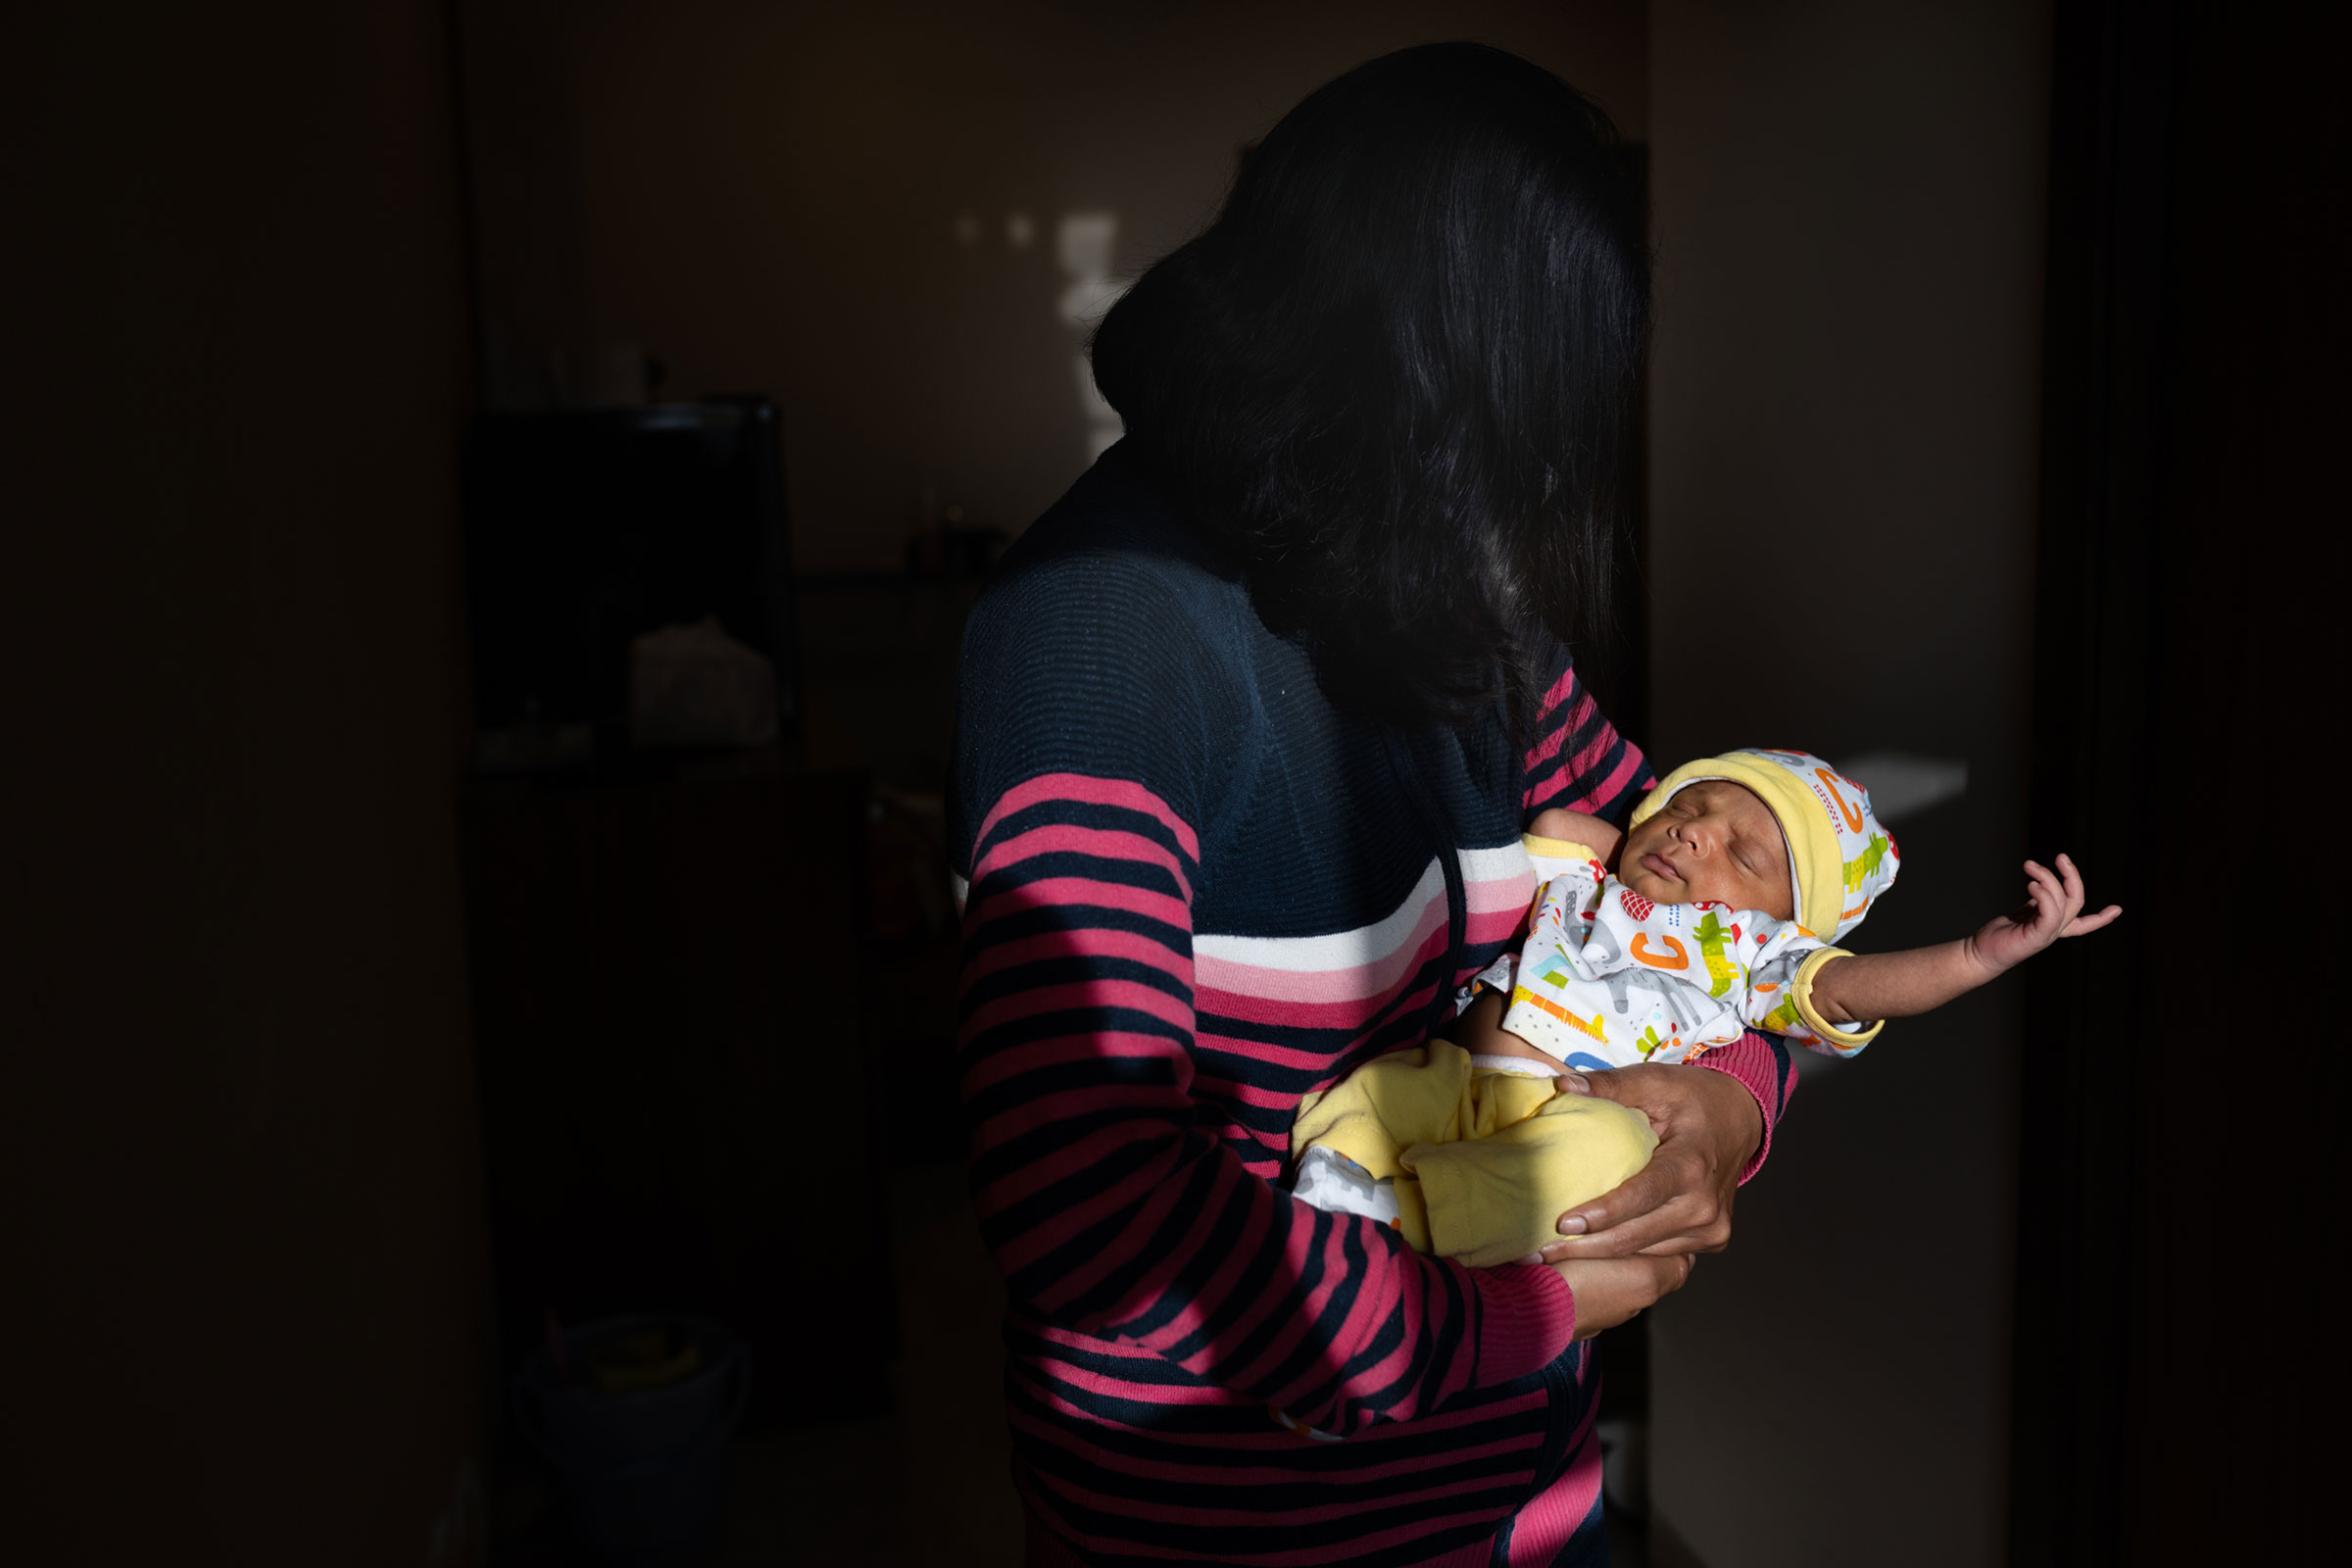 Pooja, who asked TIME to withhold her last name, carries her two-week-old son born through surrogacy at the Akanksha Hospital. She is an Indian citizen but lives in the U.S. with her husband. "The pandemic helped in keeping our surrogacy a secret with our friends in the U.S.," Pooja says. "We told everyone that I was pregnant and have now announced that we had a baby." (Smita Sharma for TIME)